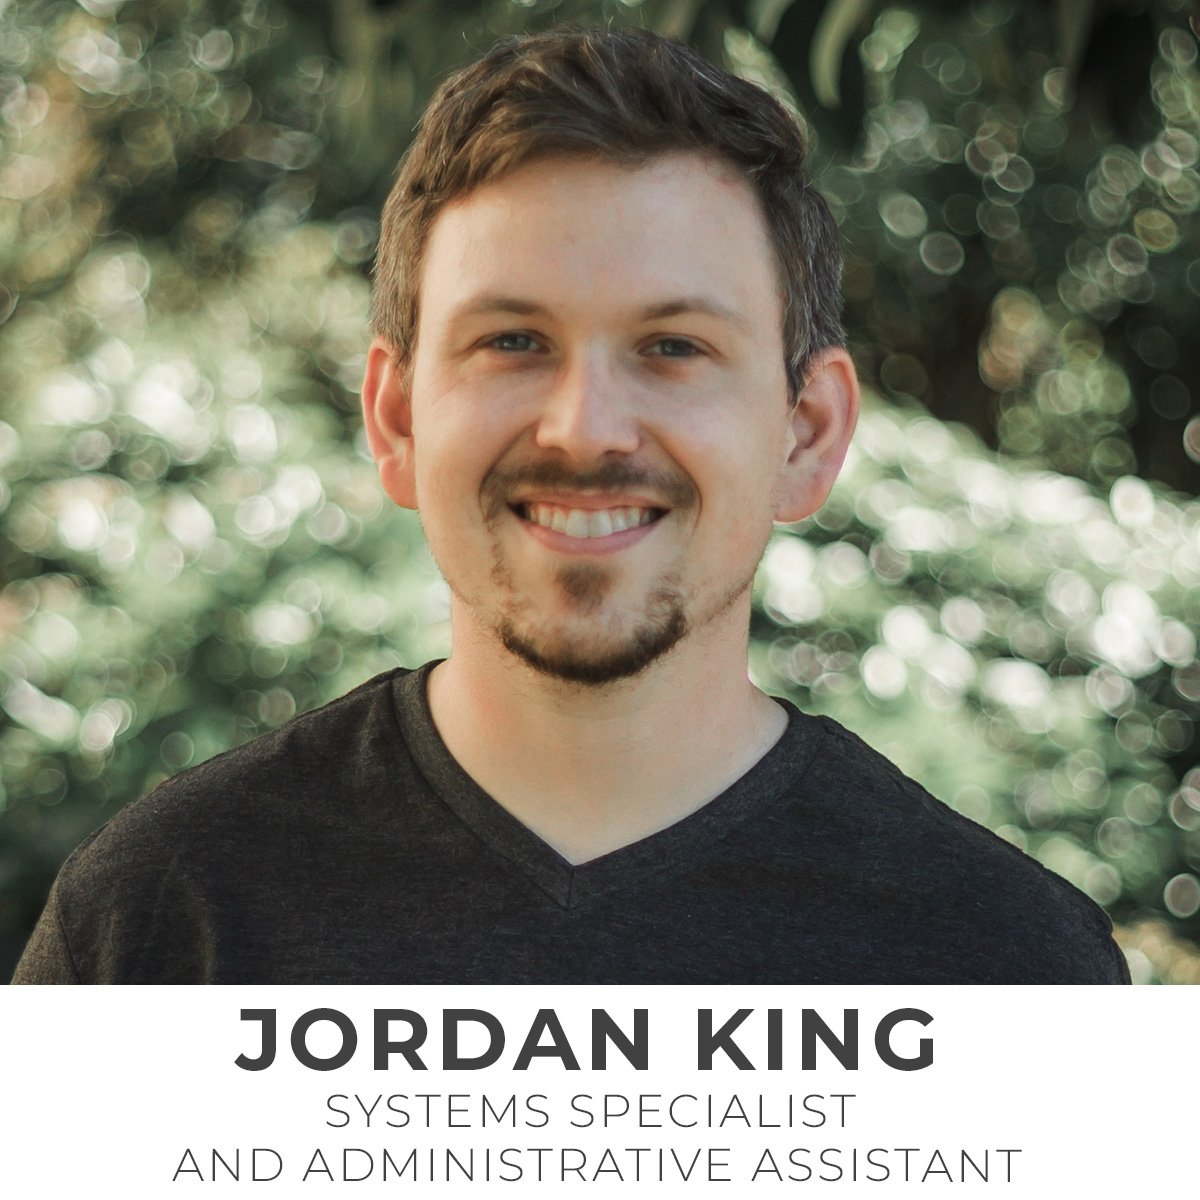 Jordan King, Systems Specialist and Administrative Assistant